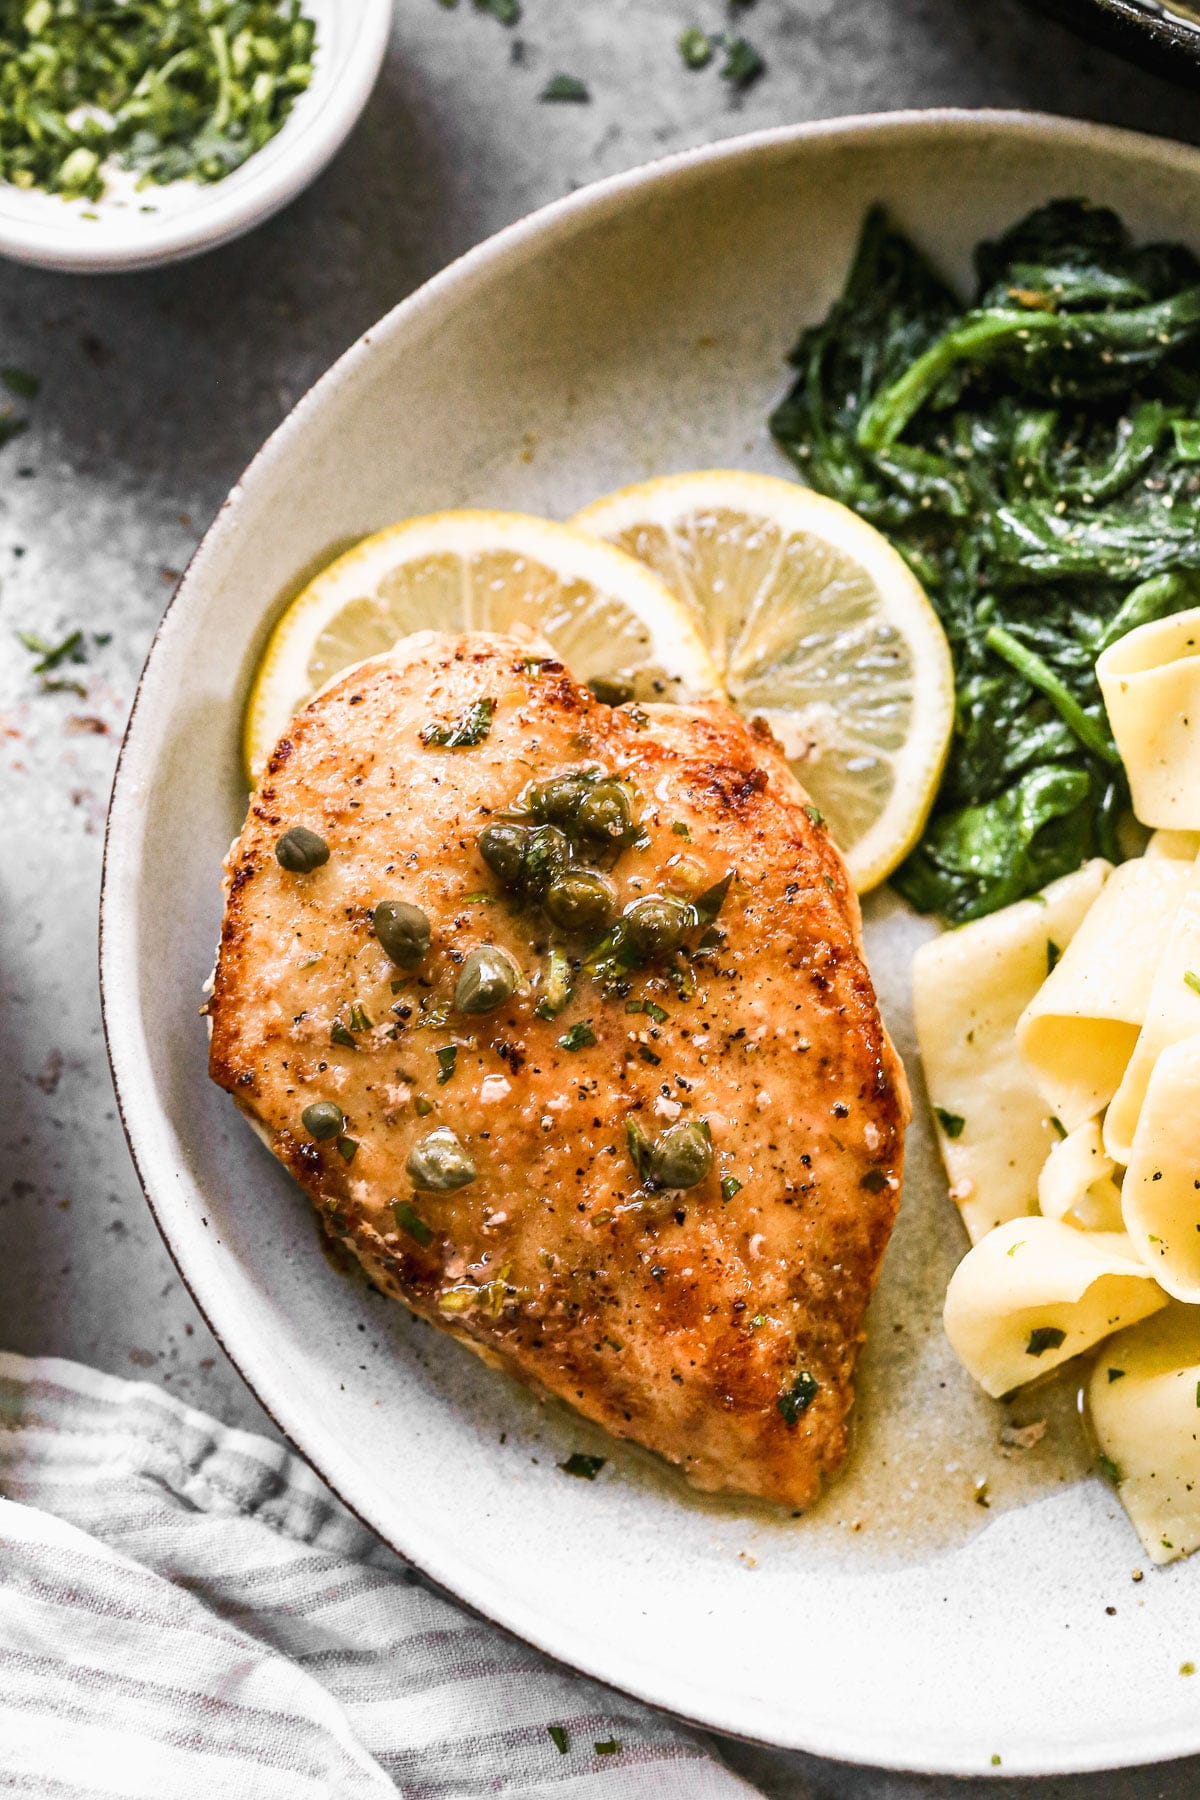 This Healthy Chicken Piccata Recipe will quickly become your new favorite weeknight dinner! Thin chicken breasts are sautéed in butter until crusty and golden brown, then smothered in a zippy lemon and white wine butter sauce. Easy, light and so delicious! 